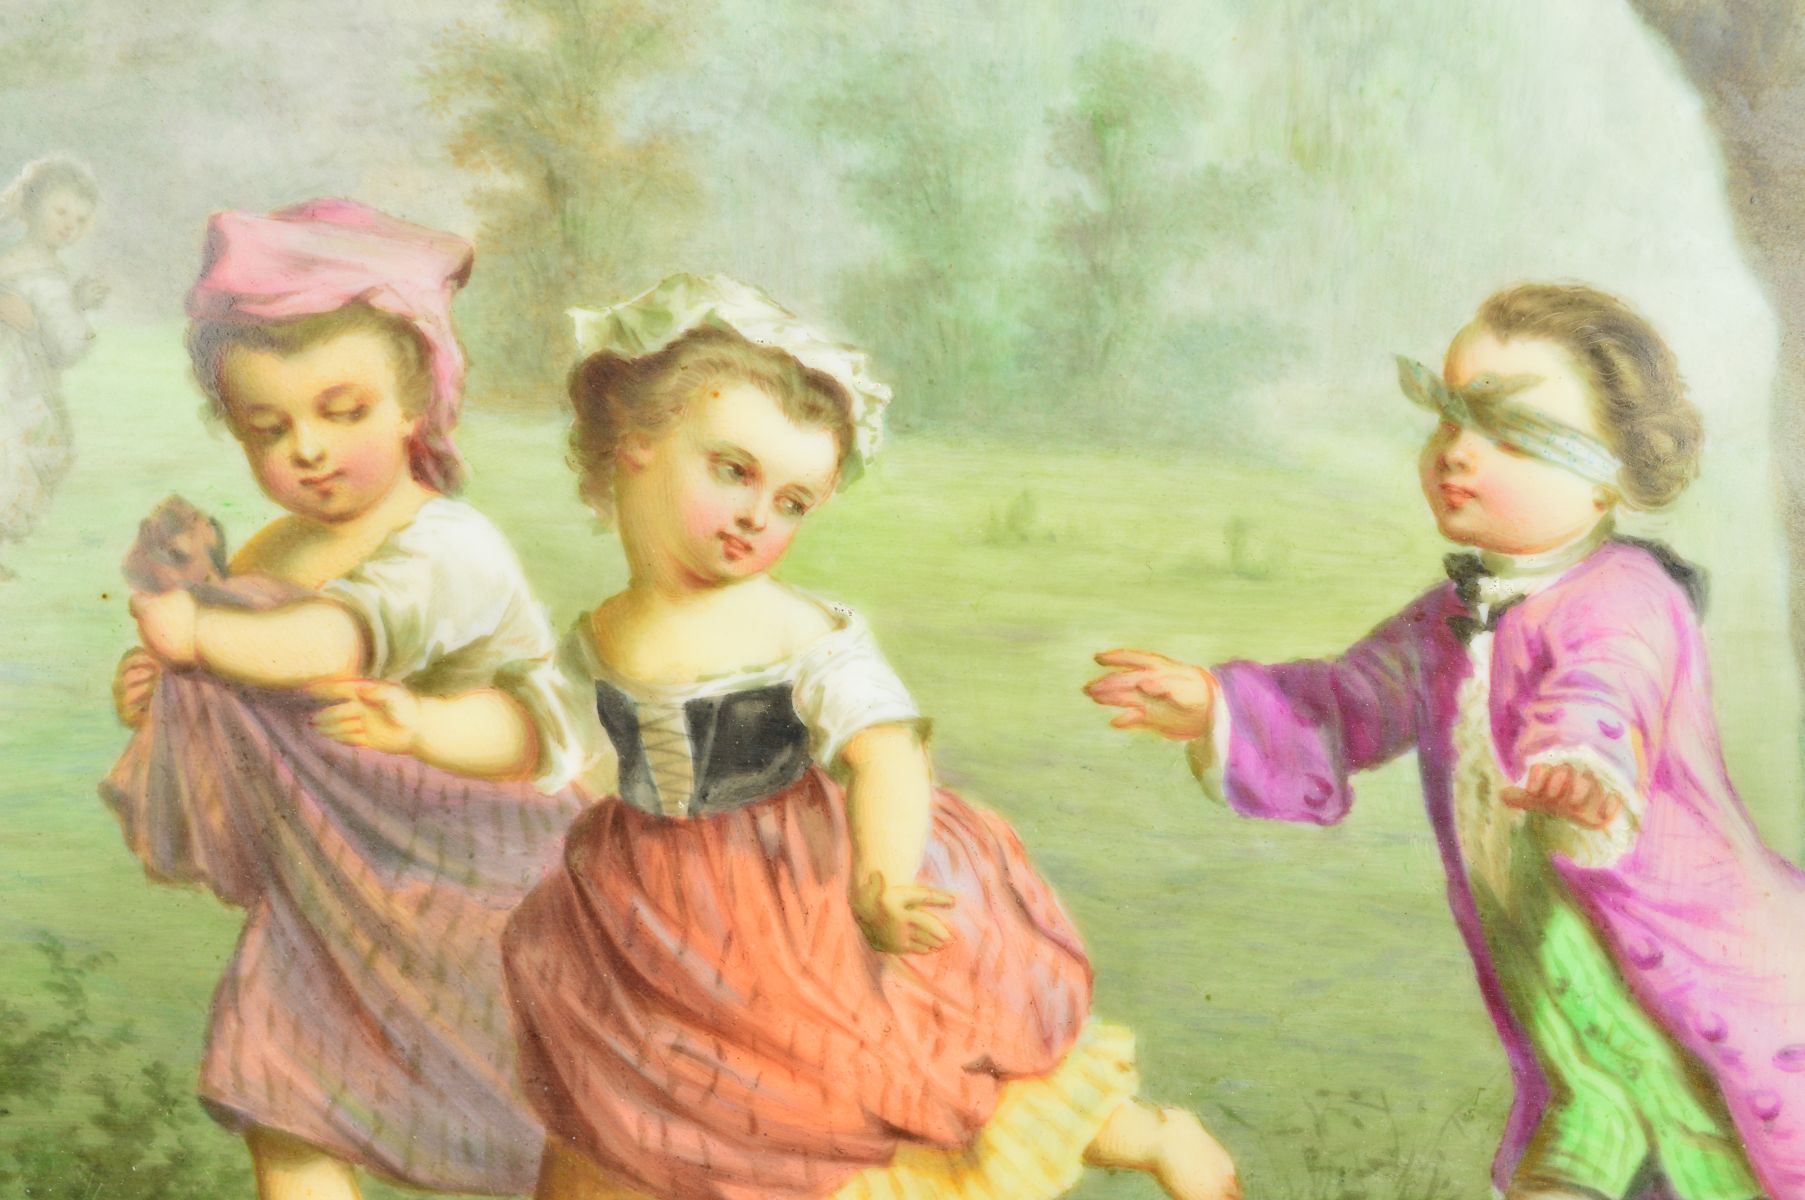 A 19TH CENTURY RECTANGULAR PORCELAIN PLAQUE, painted with children in mid/late 18th Century - Image 5 of 5